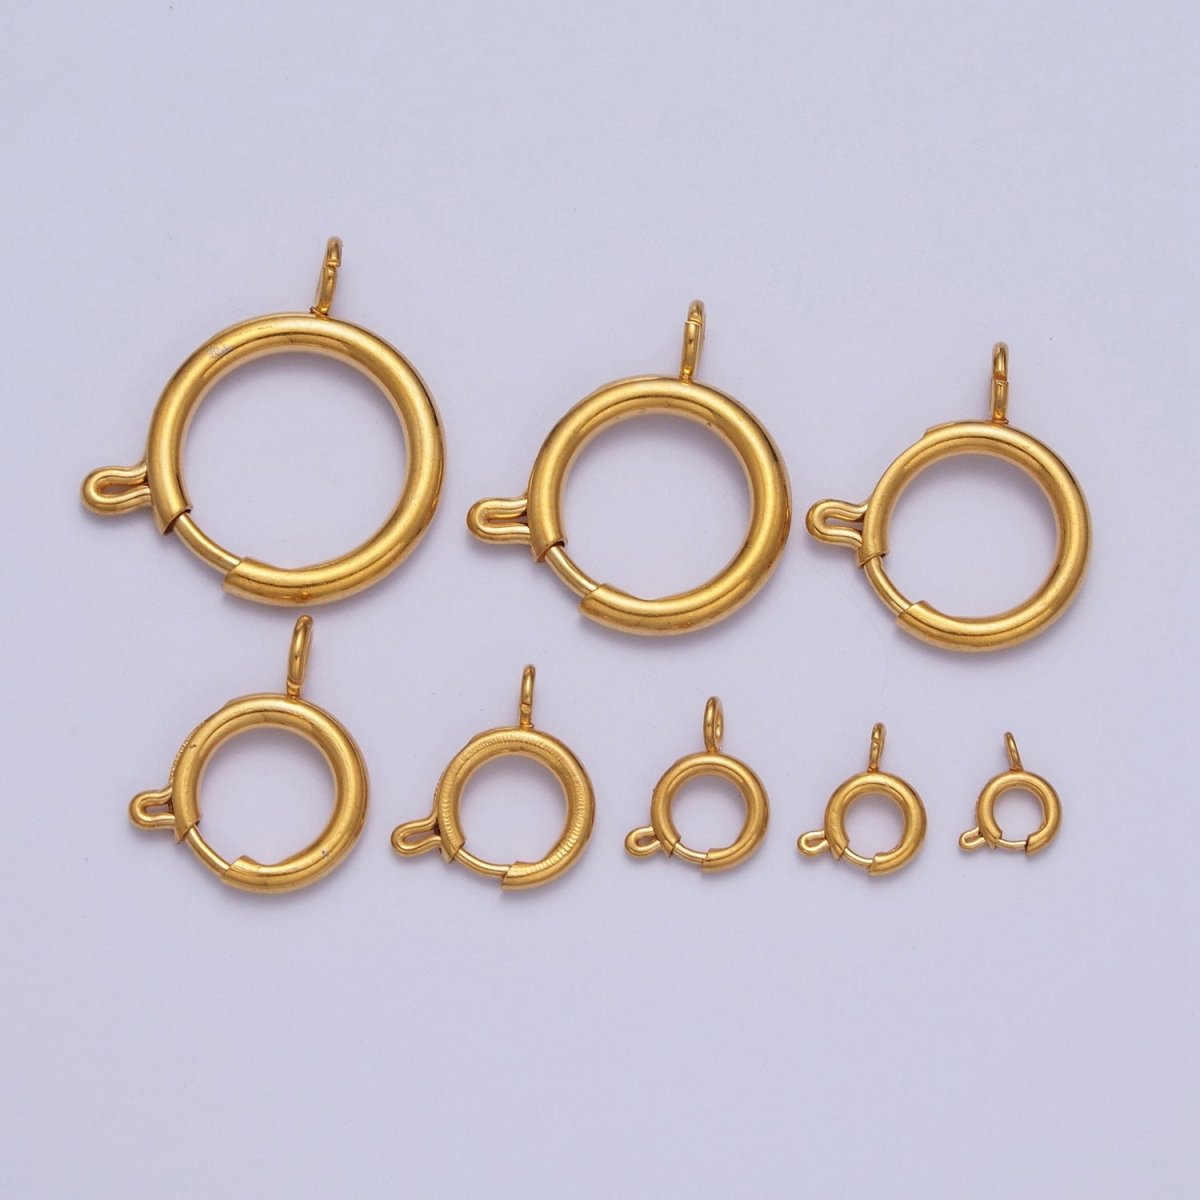 14K Gold Filled Round Spring Ring Closure Clasps For DIY Jewelry Making L-875-L882 L-912 - DLUXCA